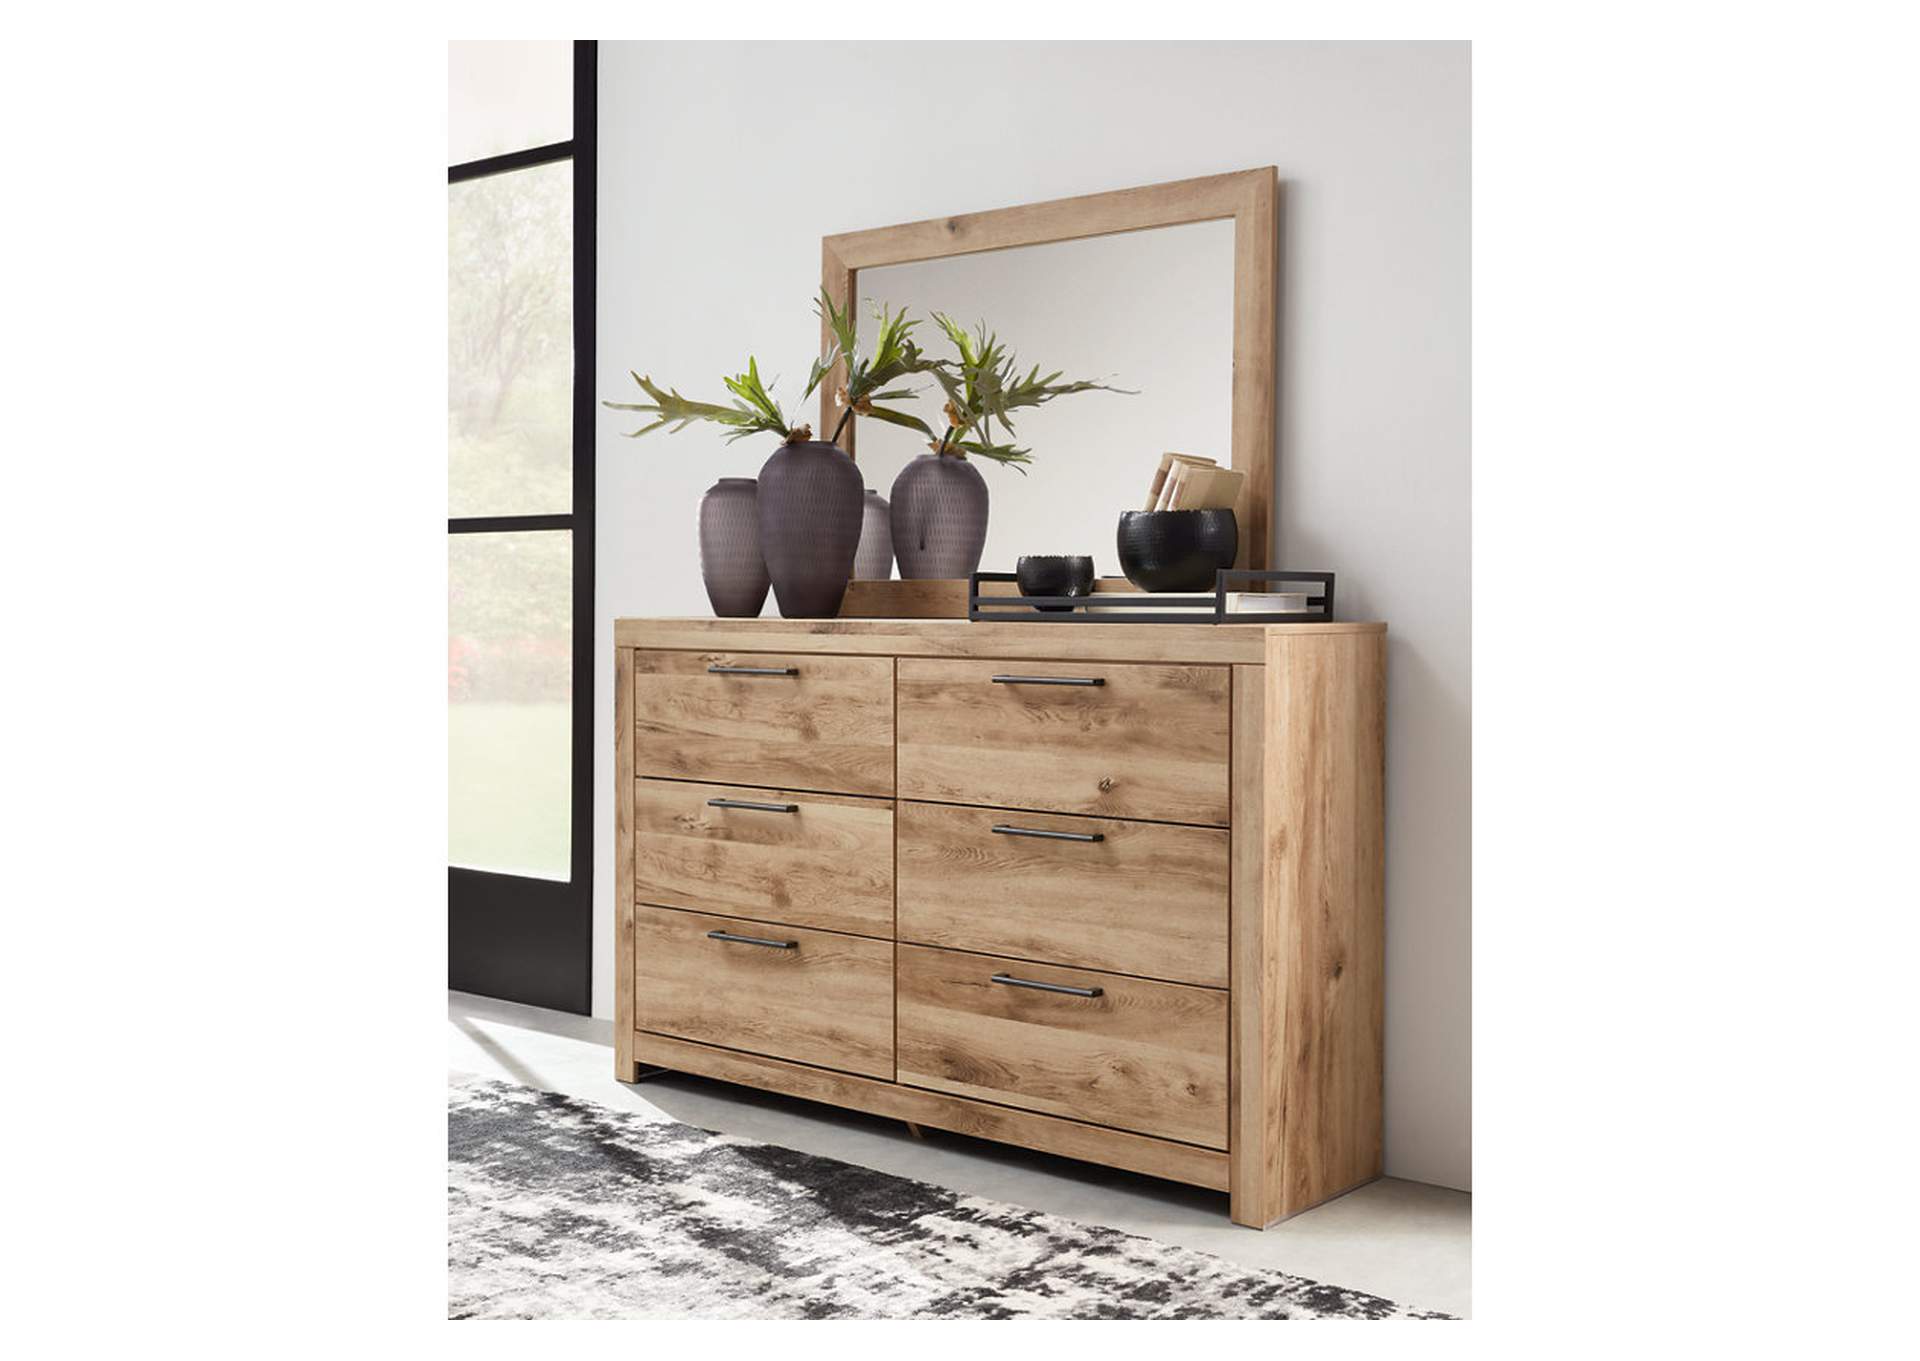 Hyanna Twin Panel Headboard with Mirrored Dresser, Chest and 2 Nightstands,Signature Design By Ashley